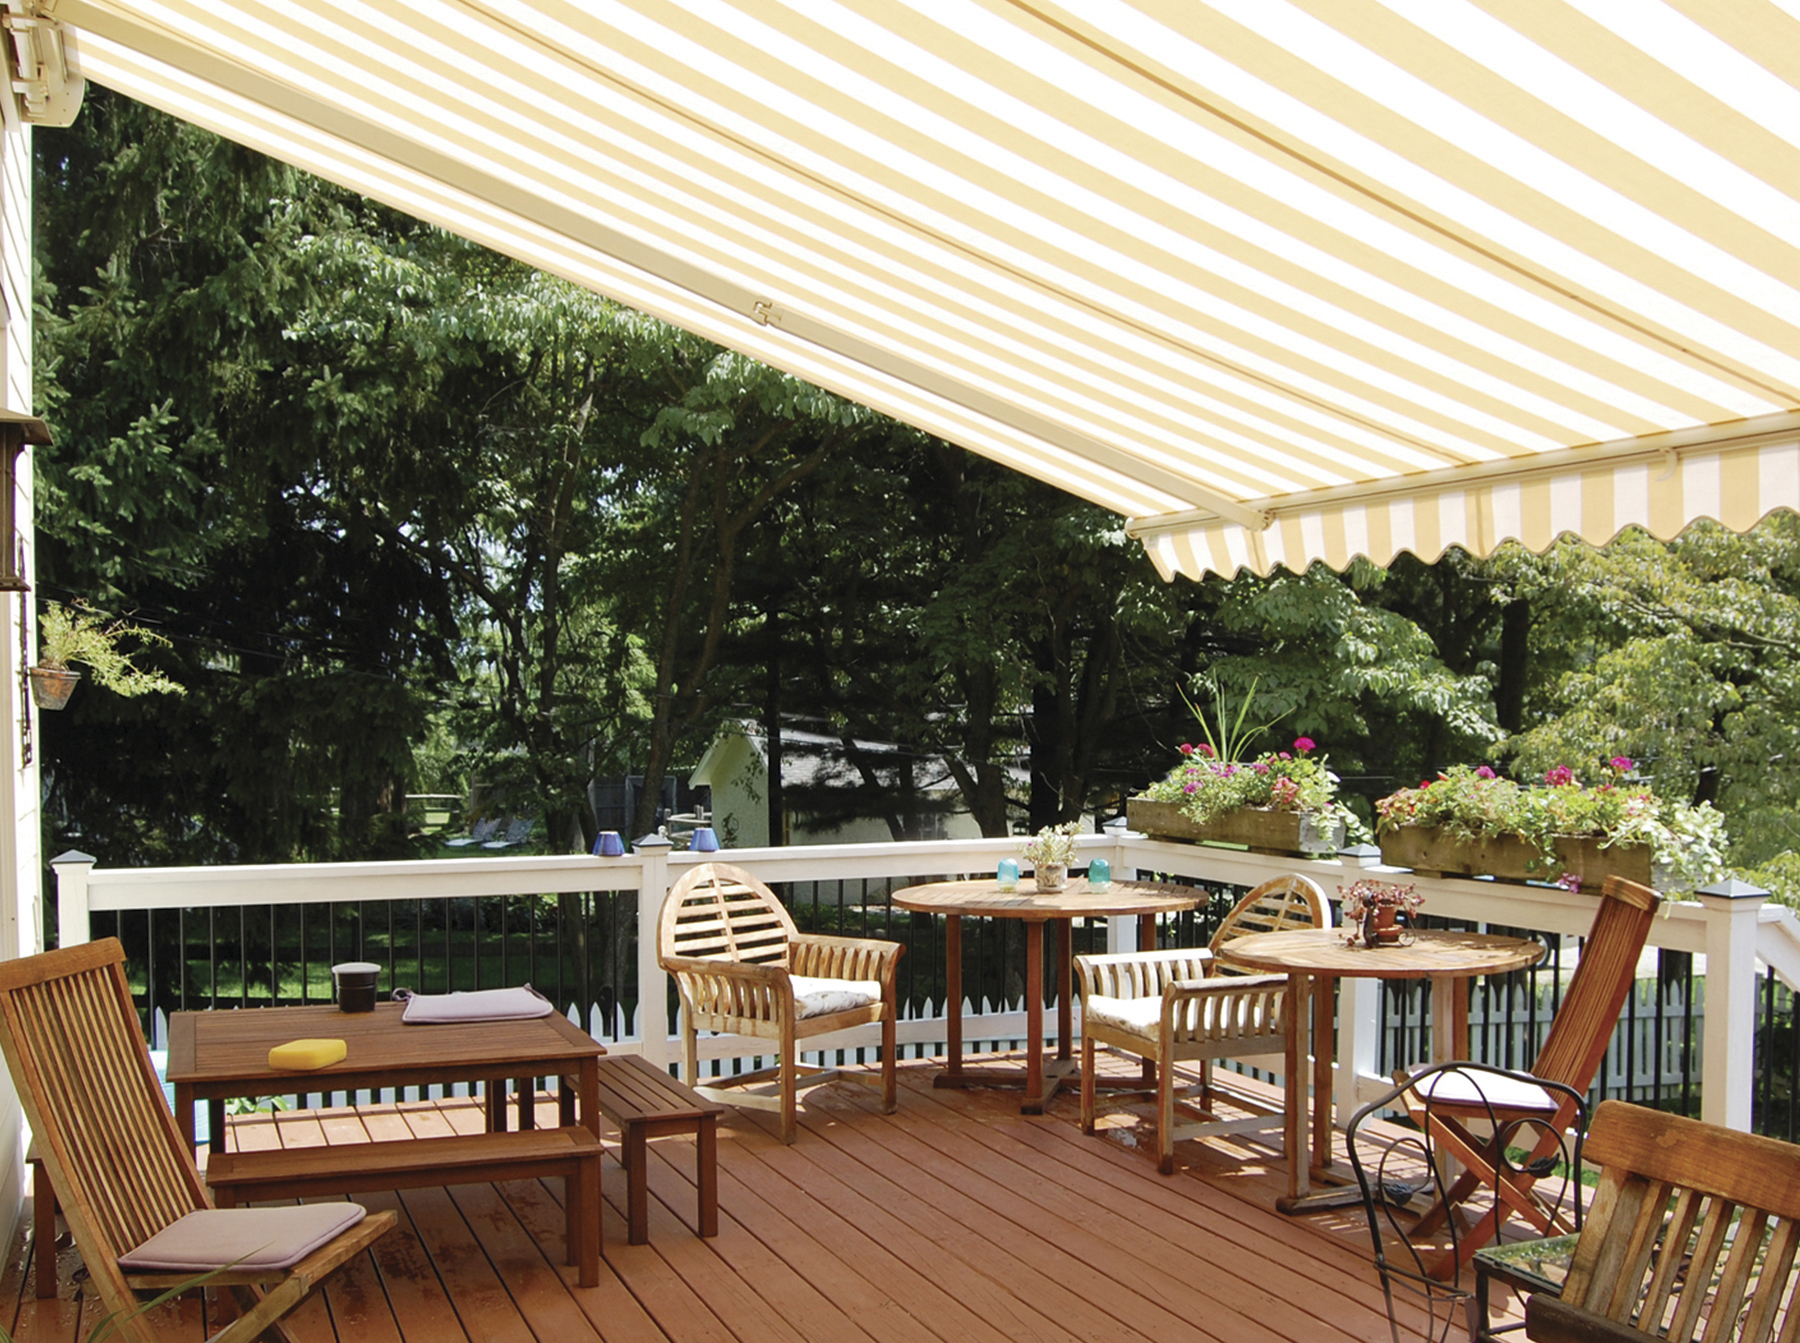 Aristocrat Retractable Awning